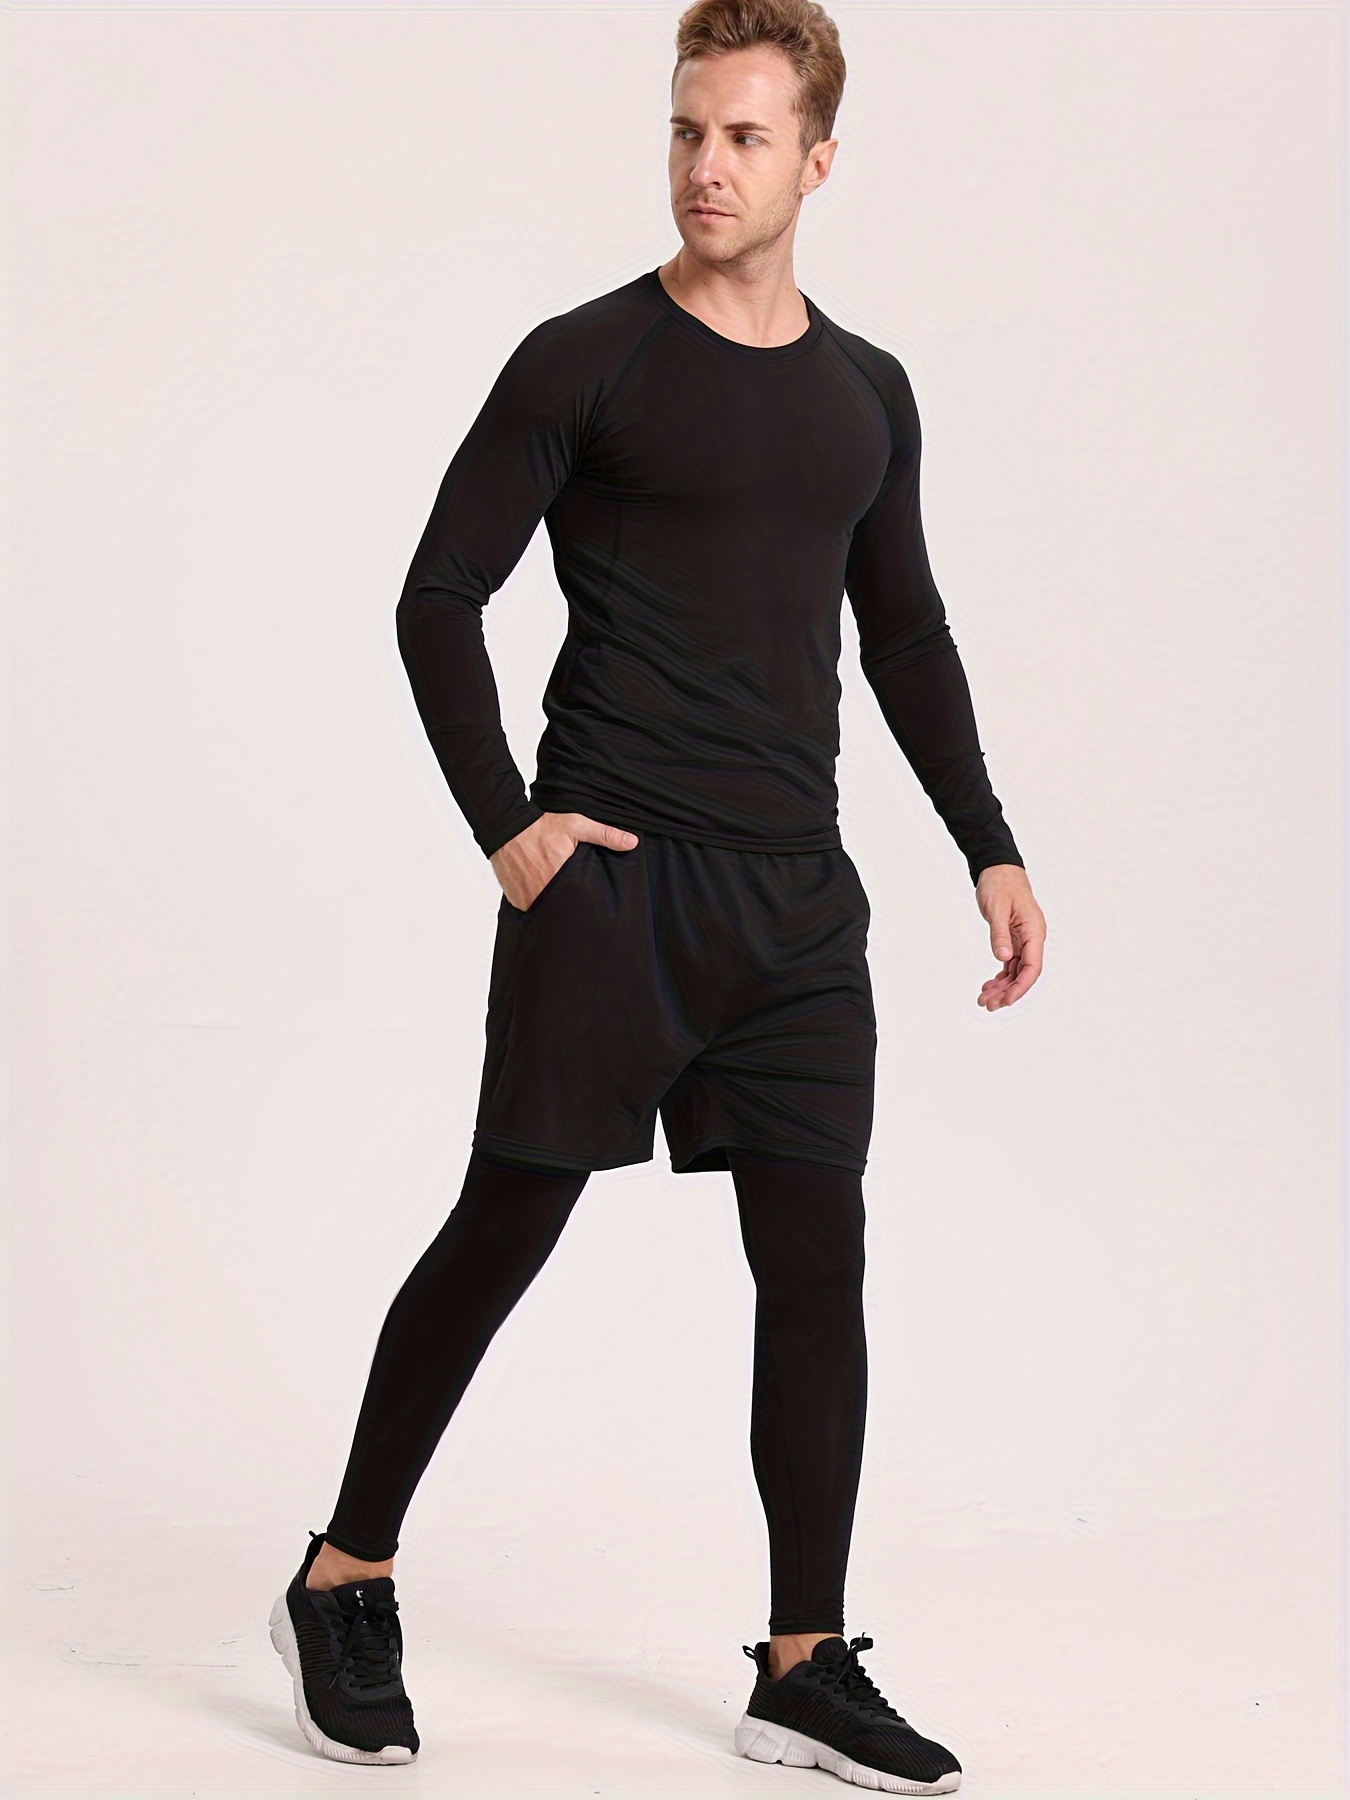 2pcs Thermal Underwear, Men's Quick Dry Fleece Compression Shirt & Comfy  High Stretch Breathable Leggings For Fall Winter Outdoor